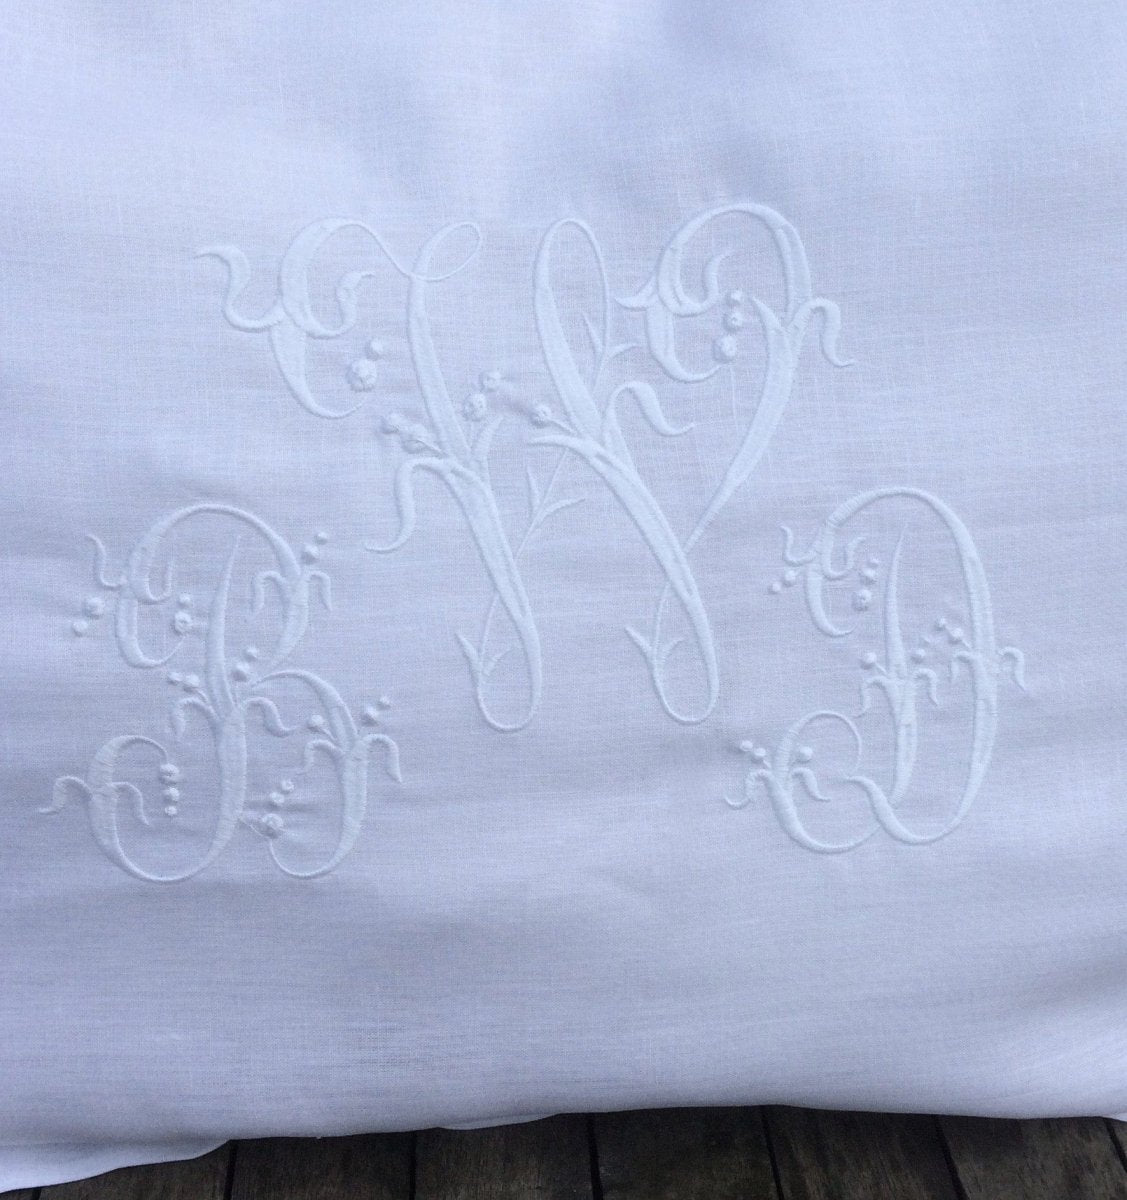 White Linen Pillowcase with Centre Embroidery - Linen and Letters